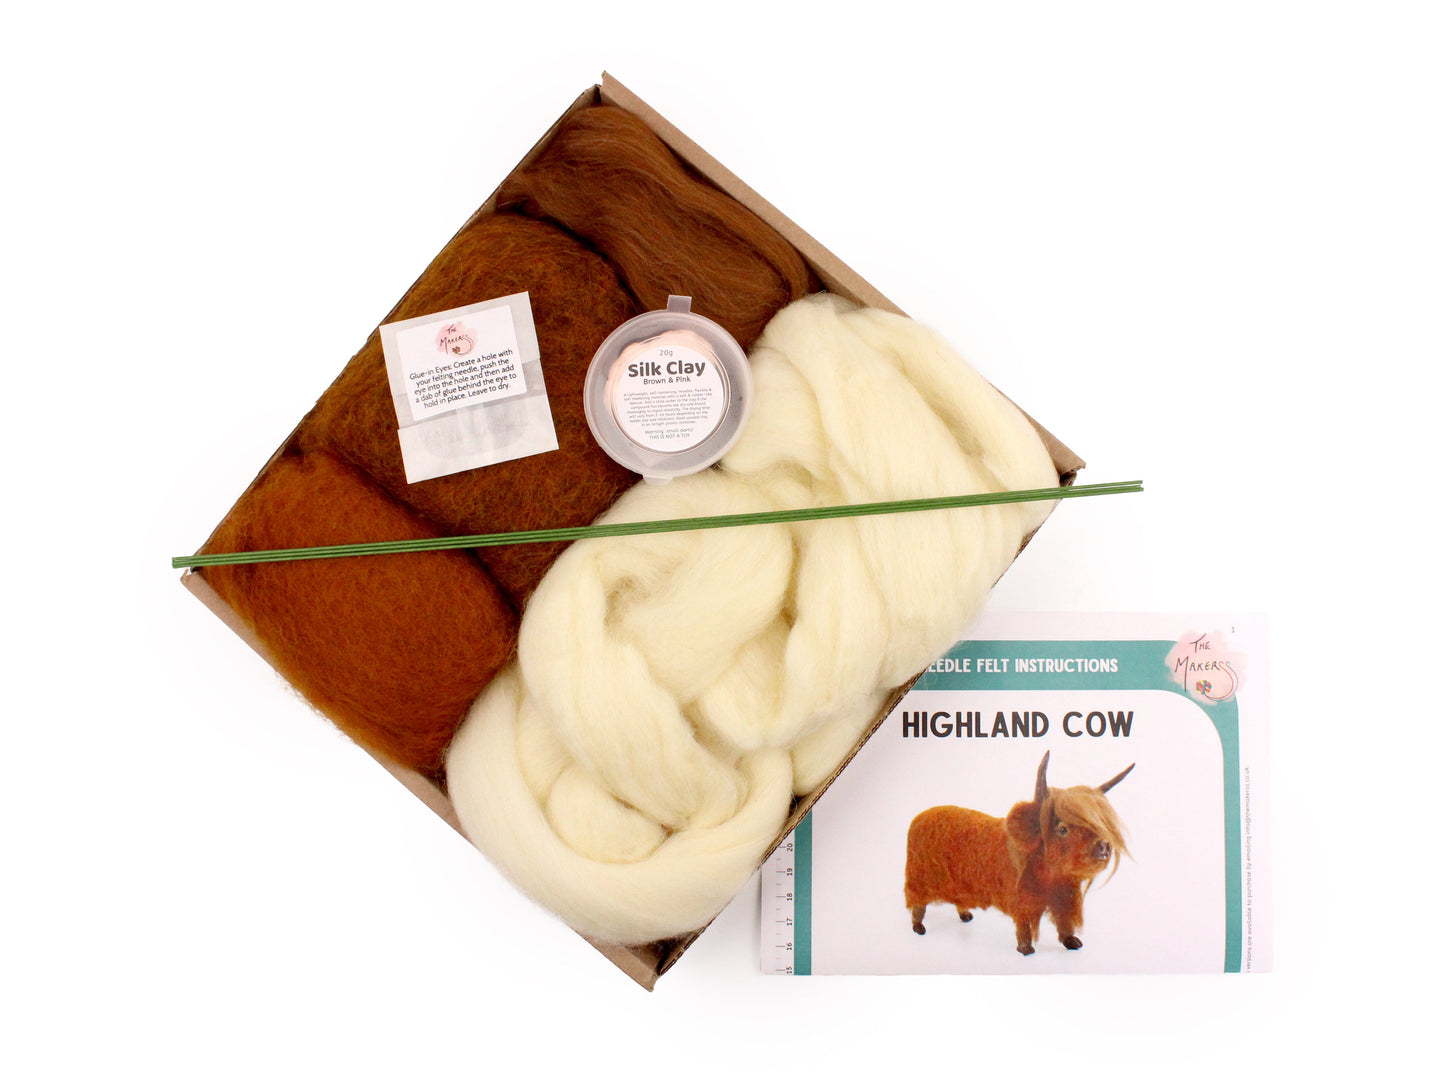 Highland Cow Needle Felt Pack - with or without tools - The Makerss